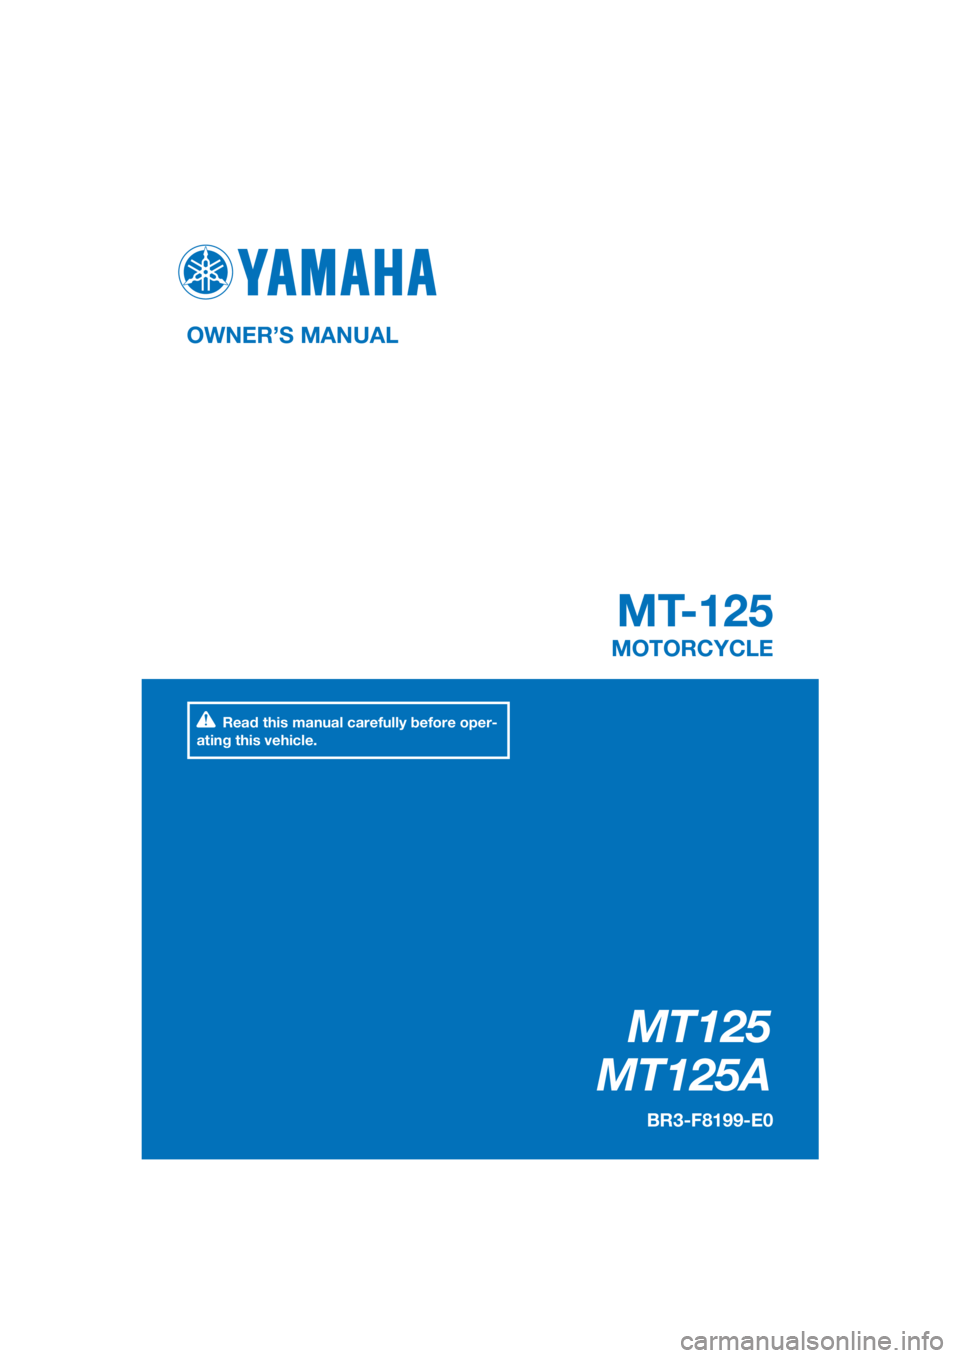 YAMAHA MT-125 2016  Owners Manual PANTONE285C
MT125
MT125A
MT-125
OWNER’S MANUAL
BR3-F8199-E0
MOTORCYCLE
[English  (E)]
Read this manual carefully before oper-
ating this vehicle. 